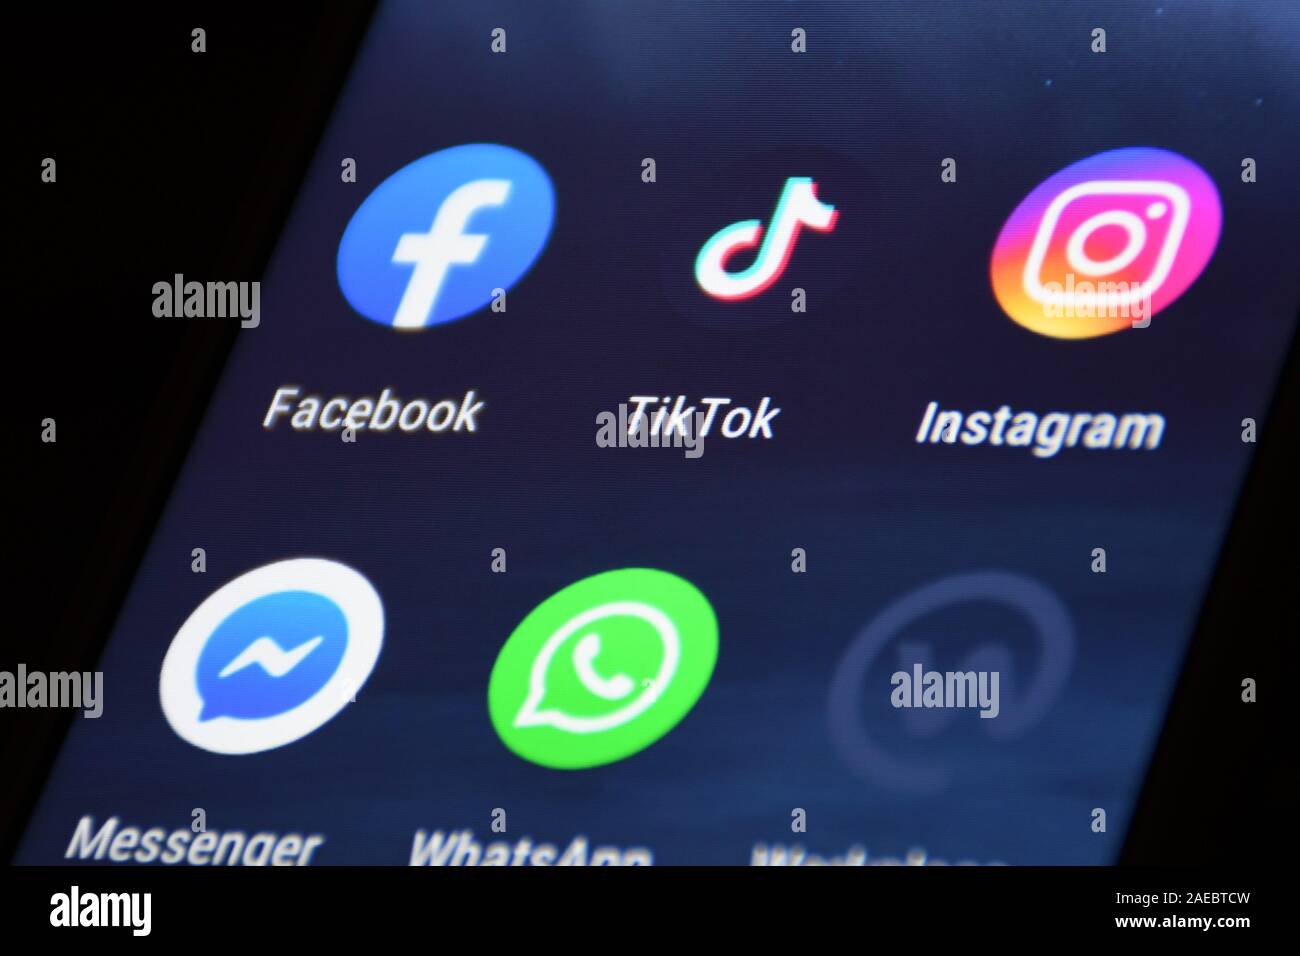 Close up view of the TikTok logo, app icon, logo displayed on a modern smartphone with other various apps Stock Photo